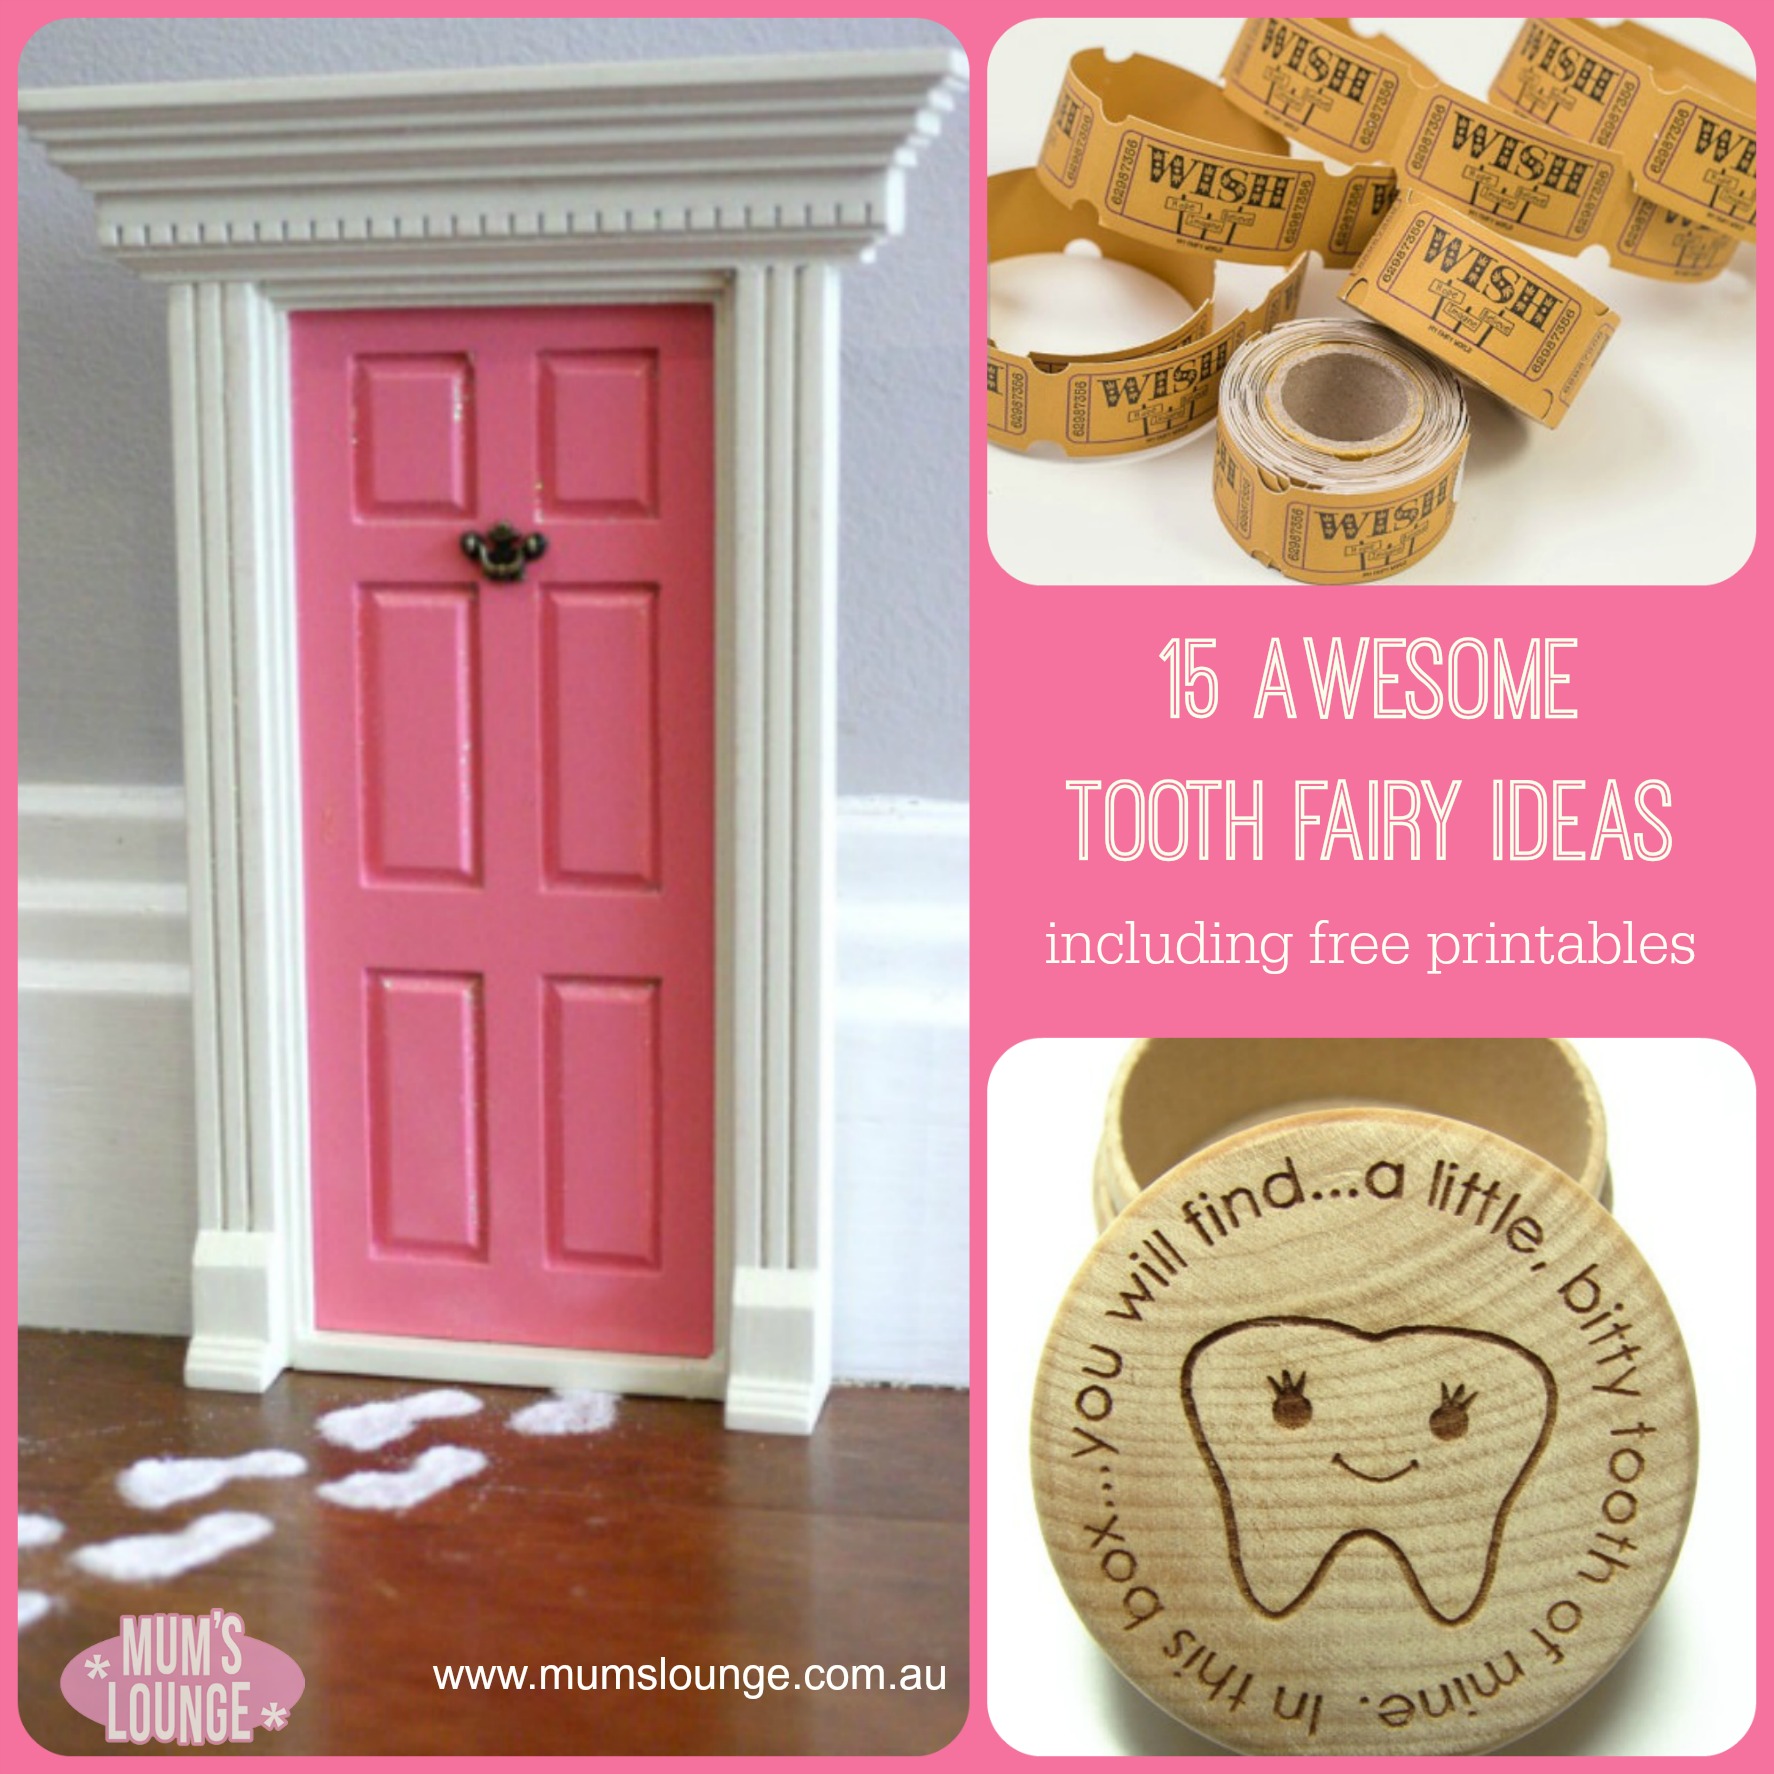 15-awesome-tooth-fairy-ideas-free-printables-mum-s-lounge